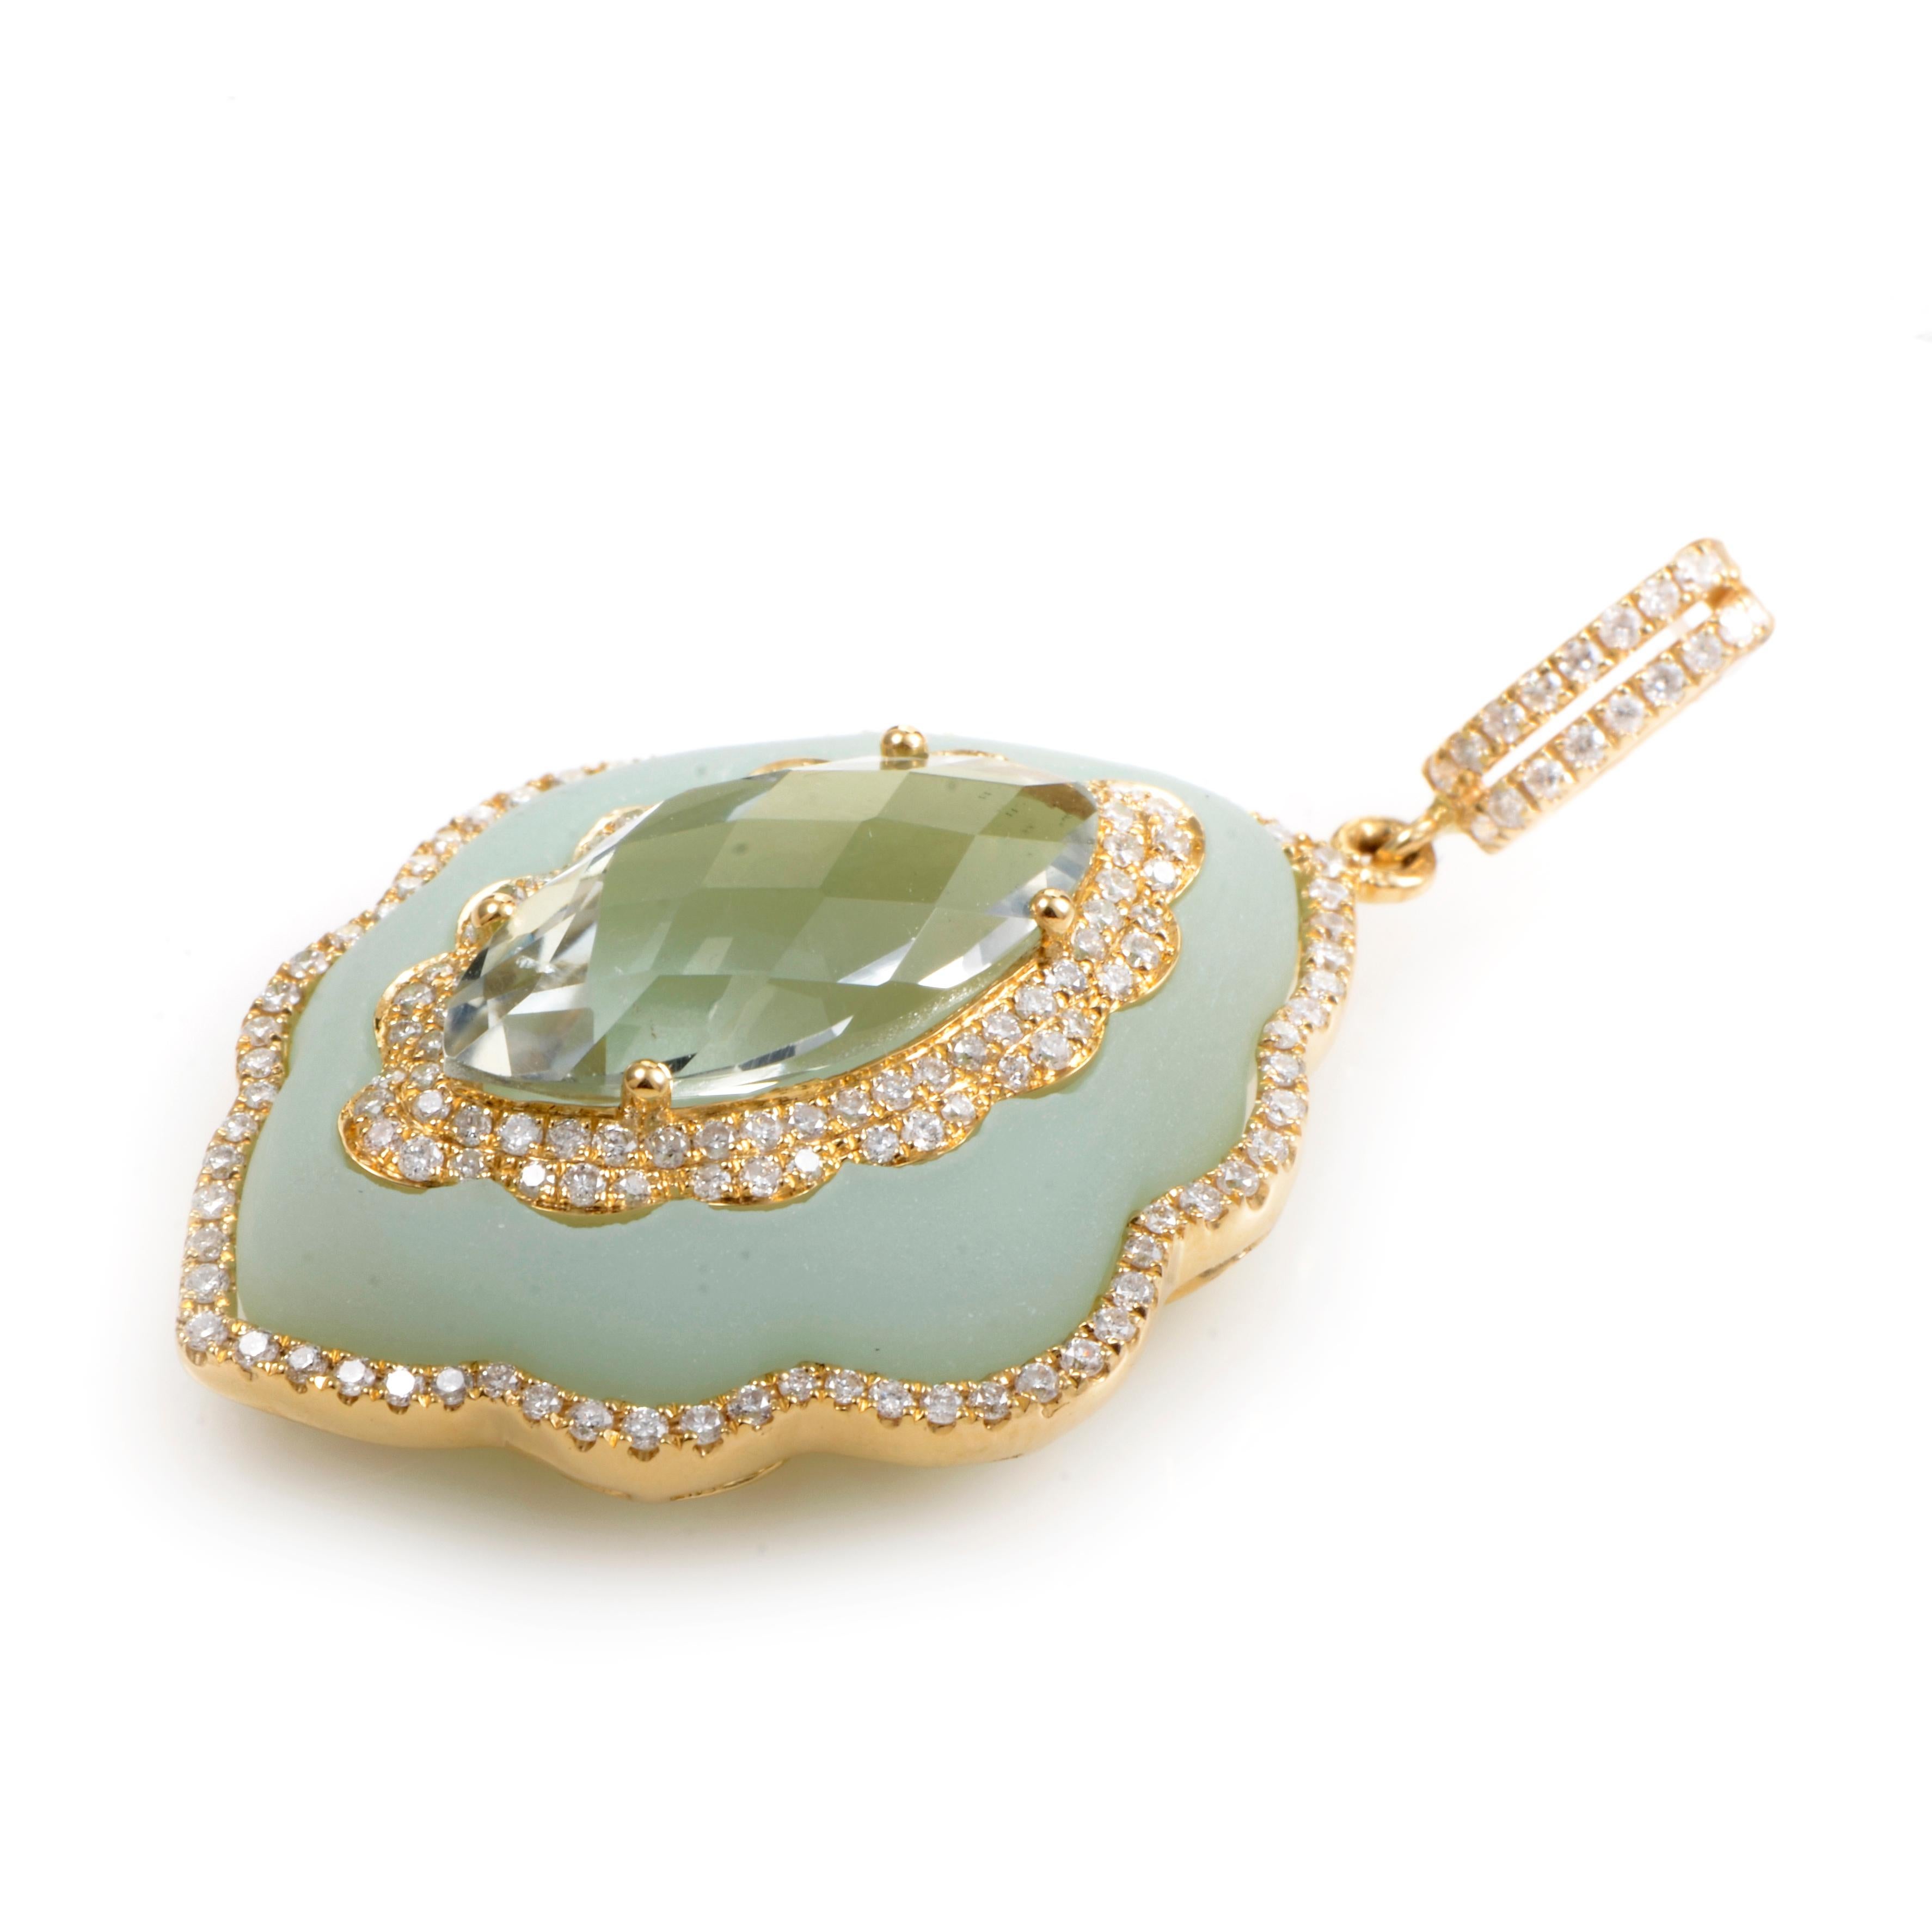 A sea of green gemstones takes center stage in this ravishing design, The pendant is made of 18K yellow gold and is set with ~30.79ct of green quartz. Lastly, a faceted green amethyst is set in the center of the quartz. Both stones are accented with